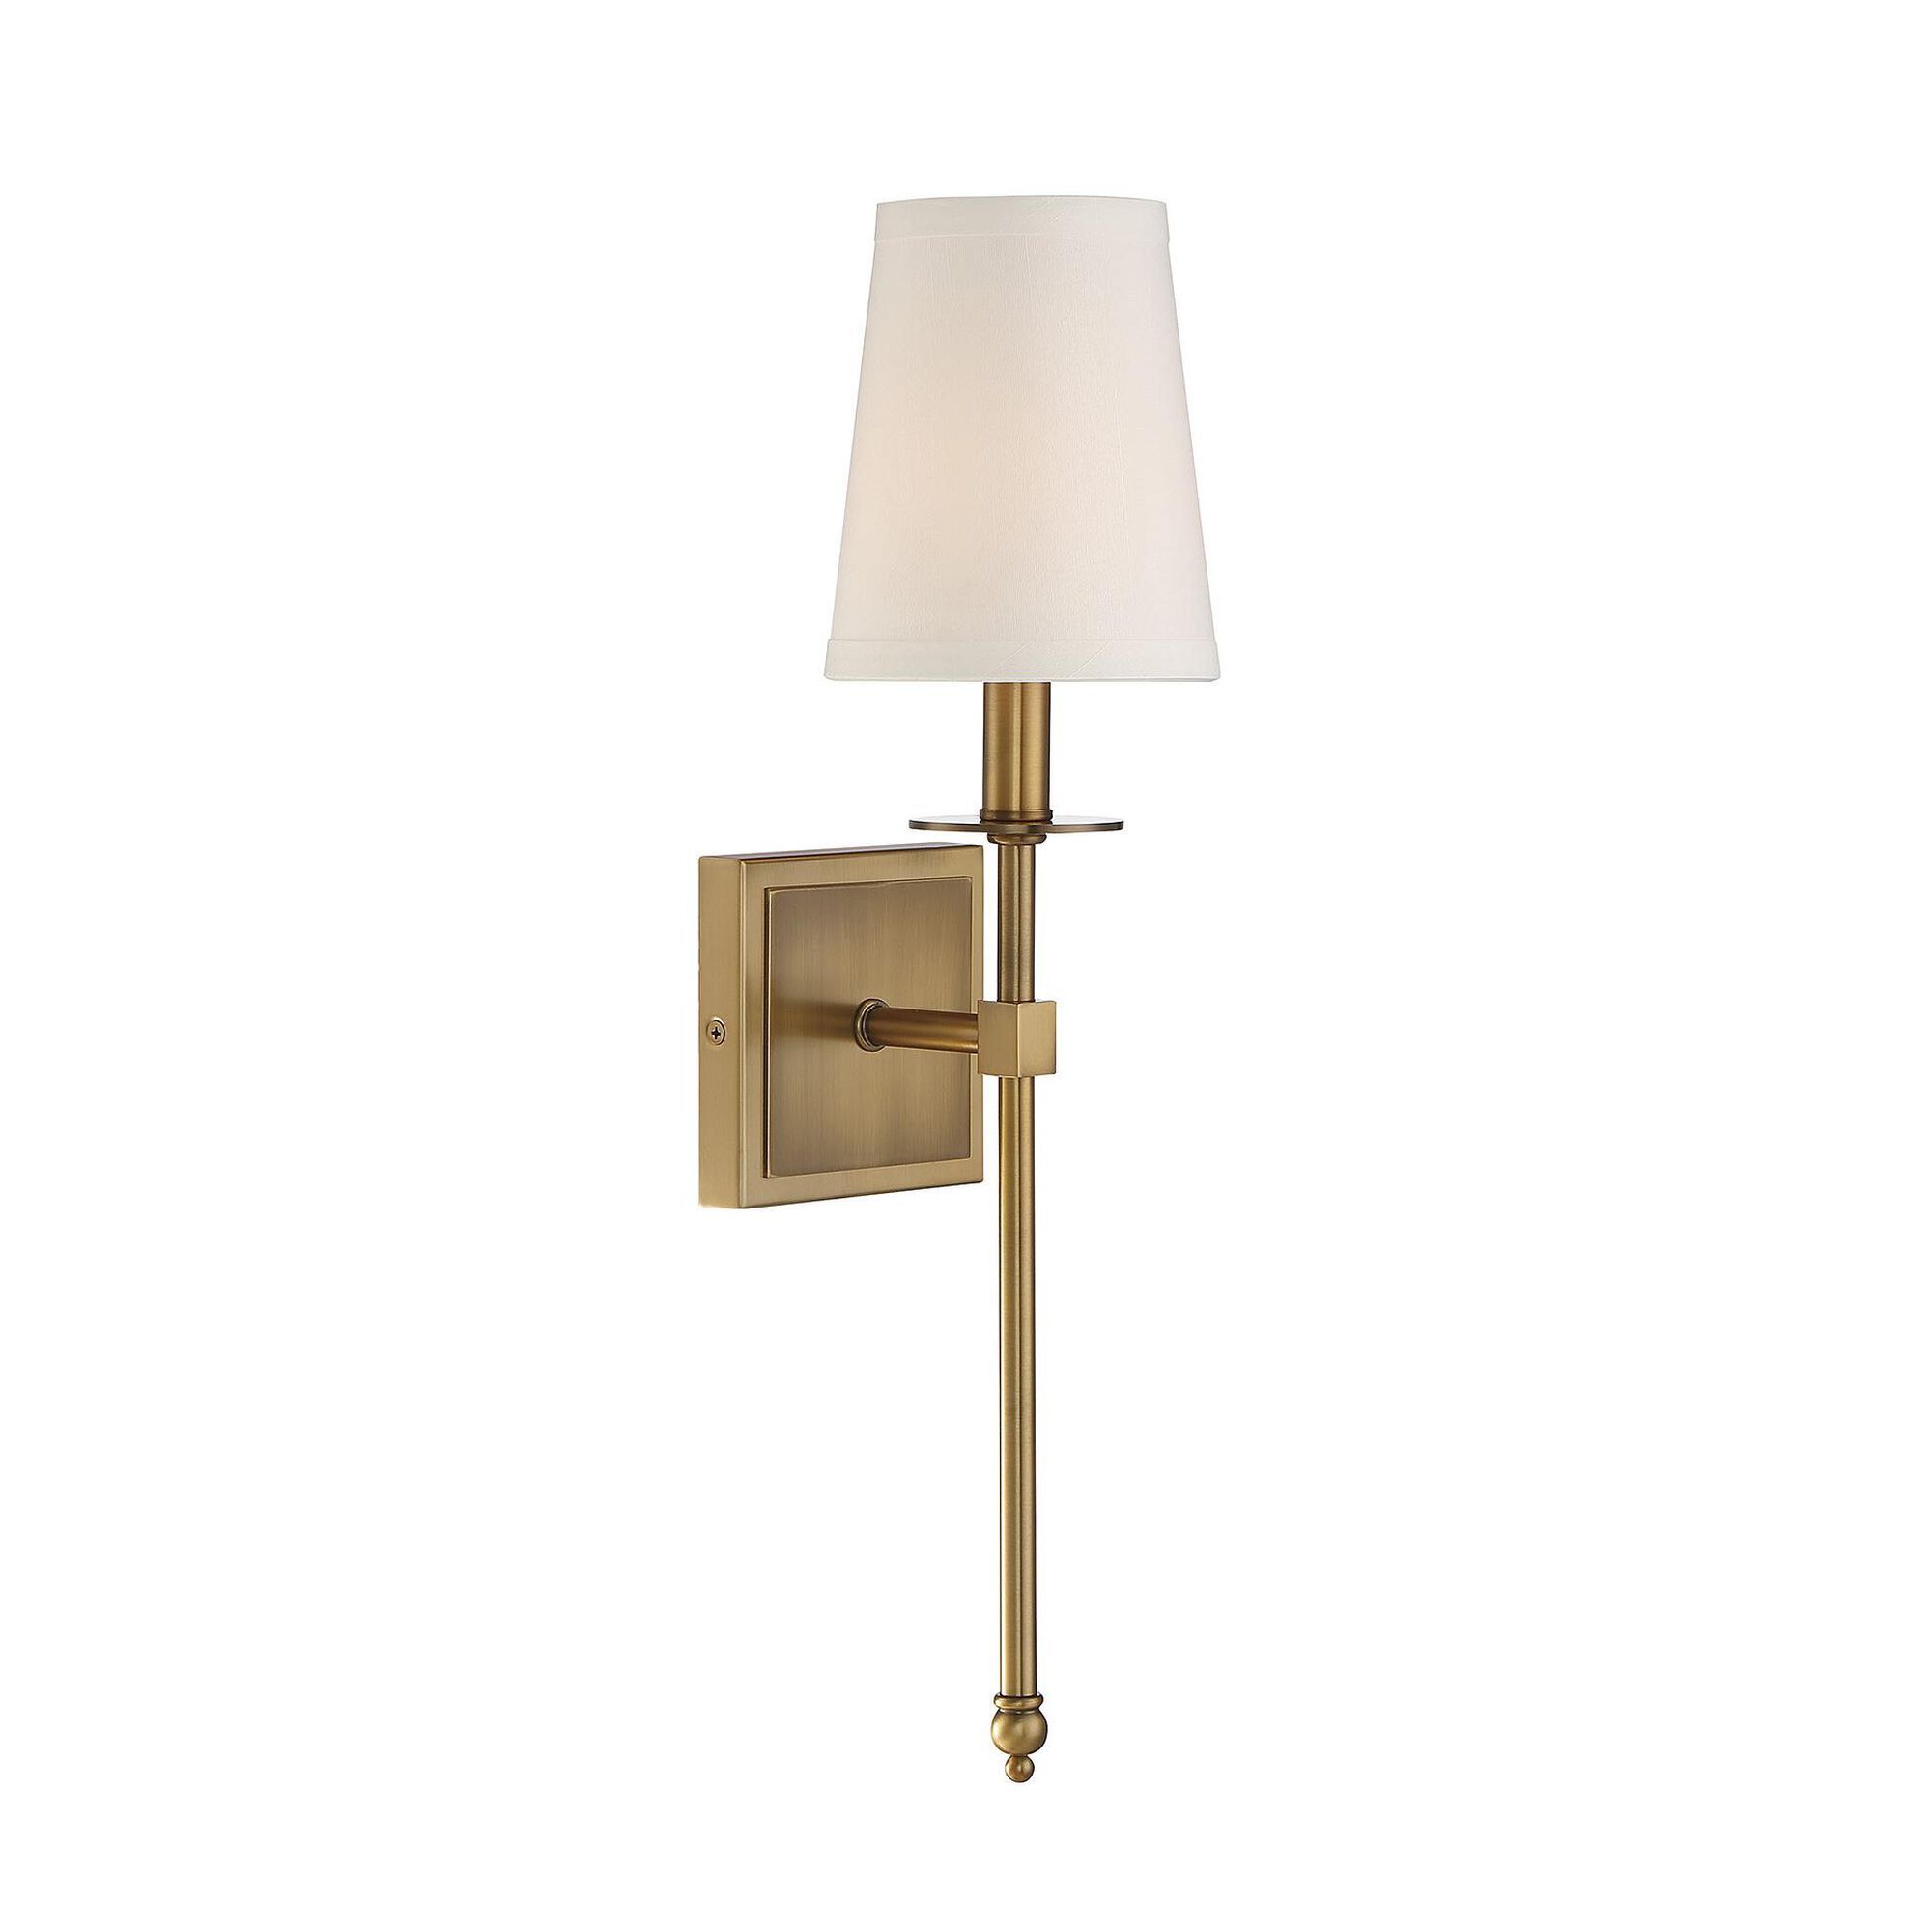 20 Inch Wall Sconce by Savoy House Monroe by Savoy House | 1800 Lighting